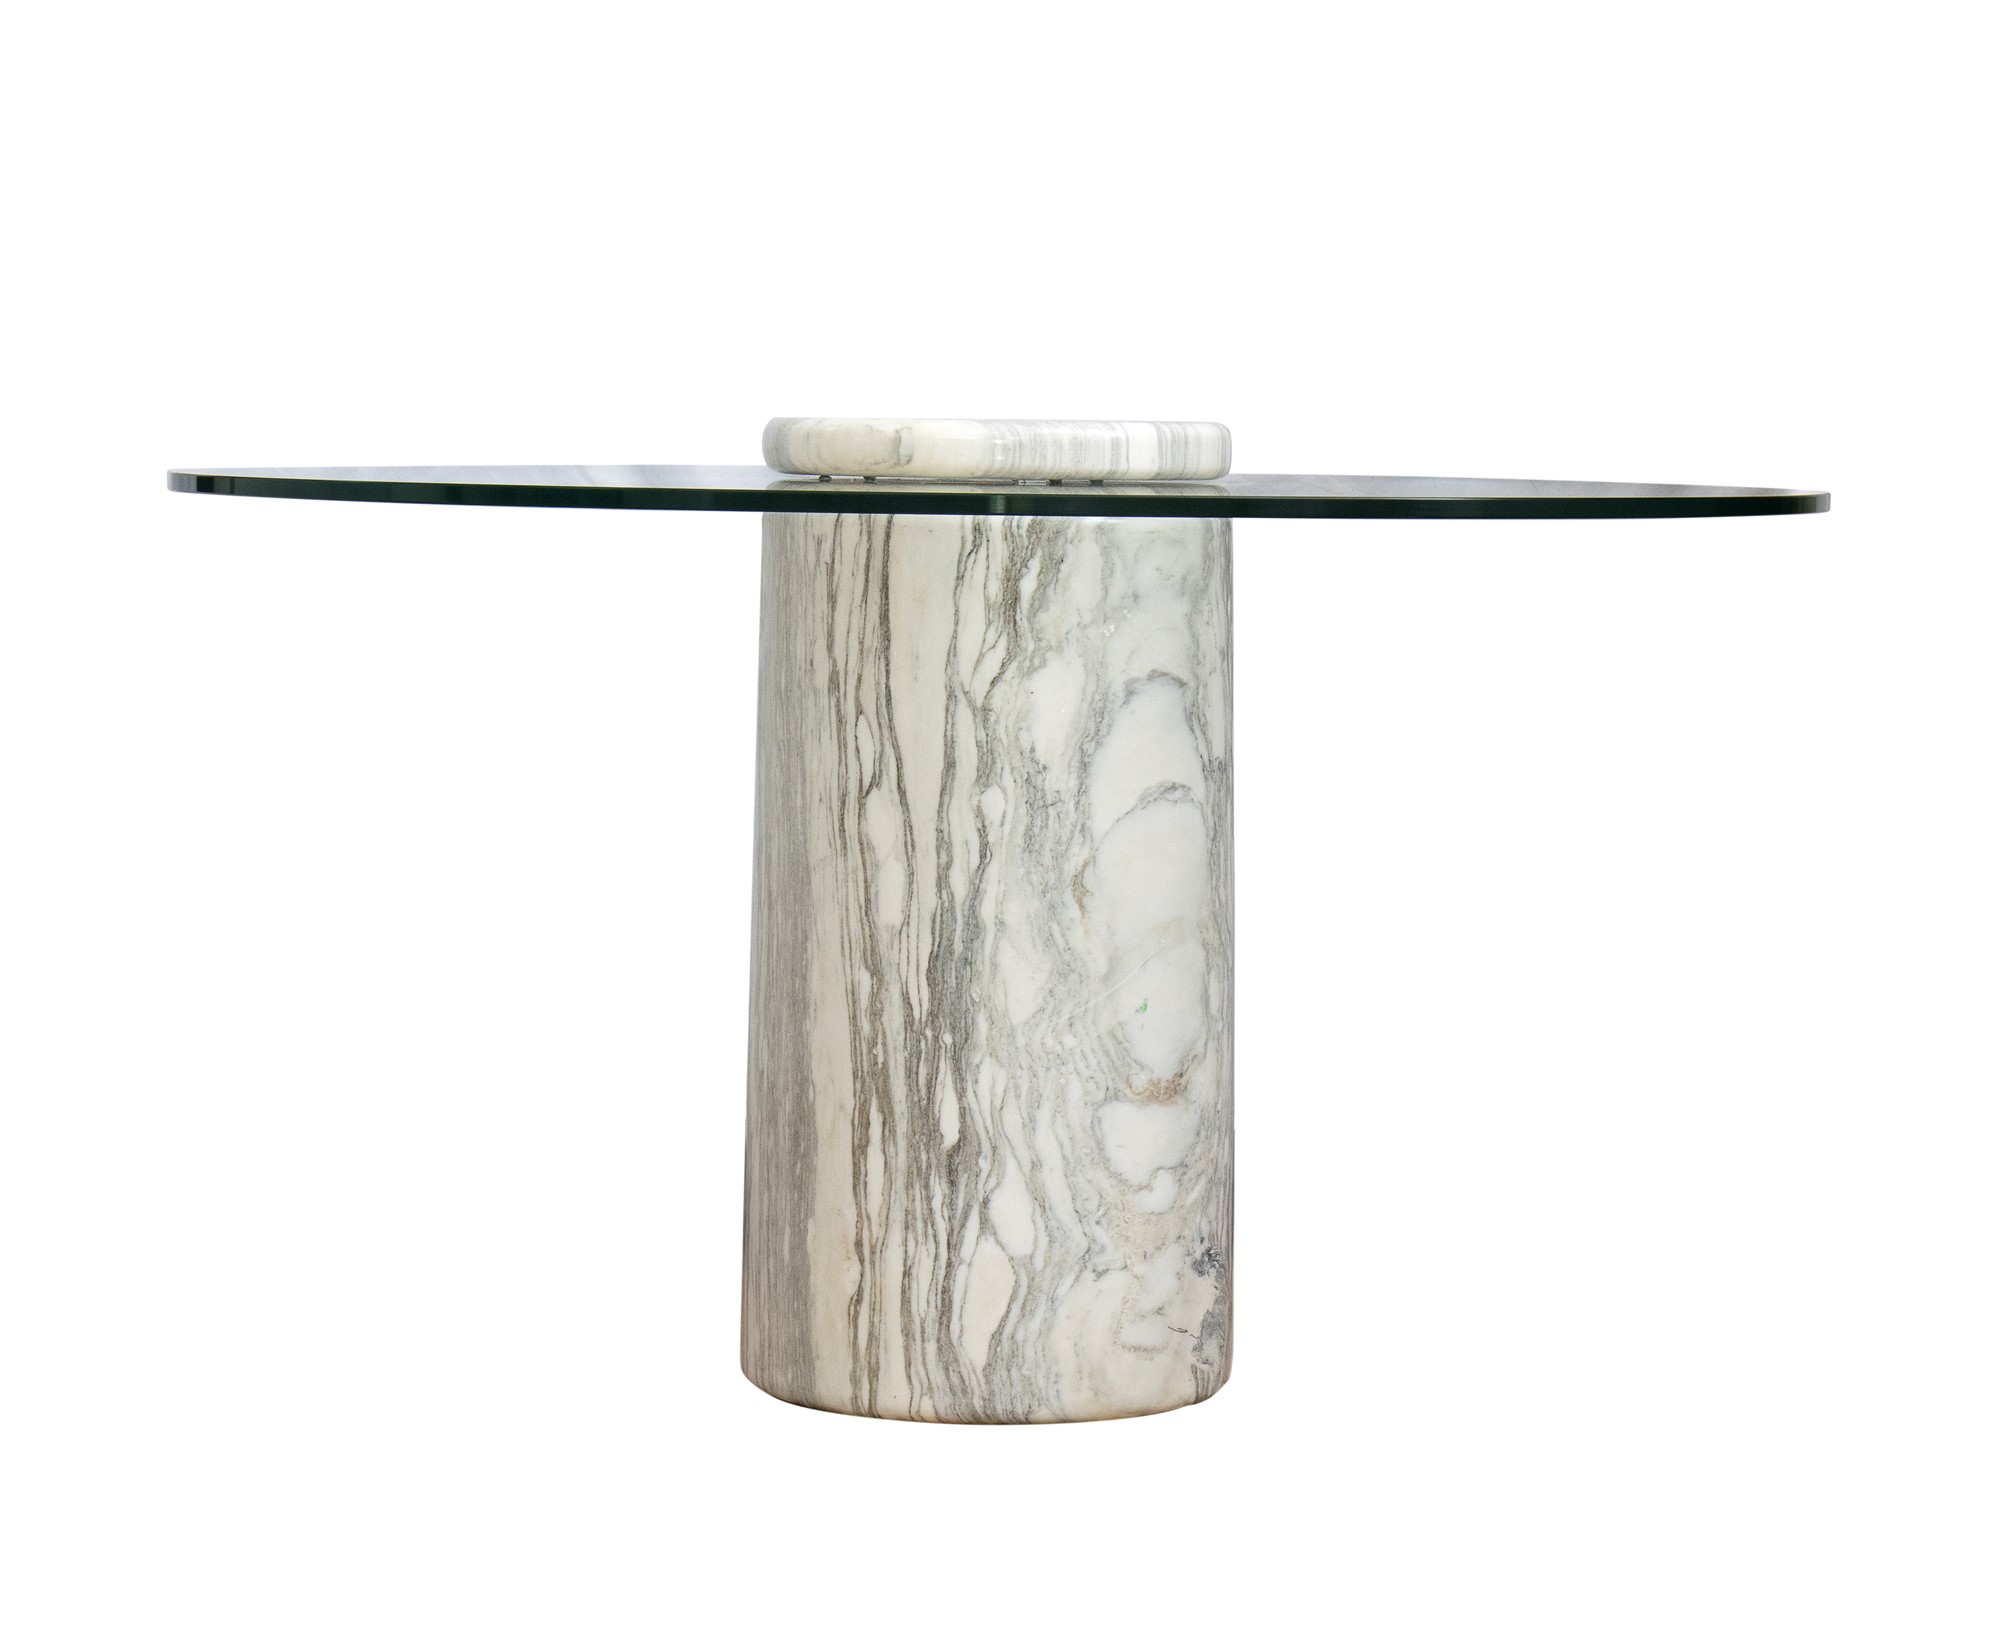 Angelo Mangiarotti Castore table in white marble and glass top - Image 7 of 7